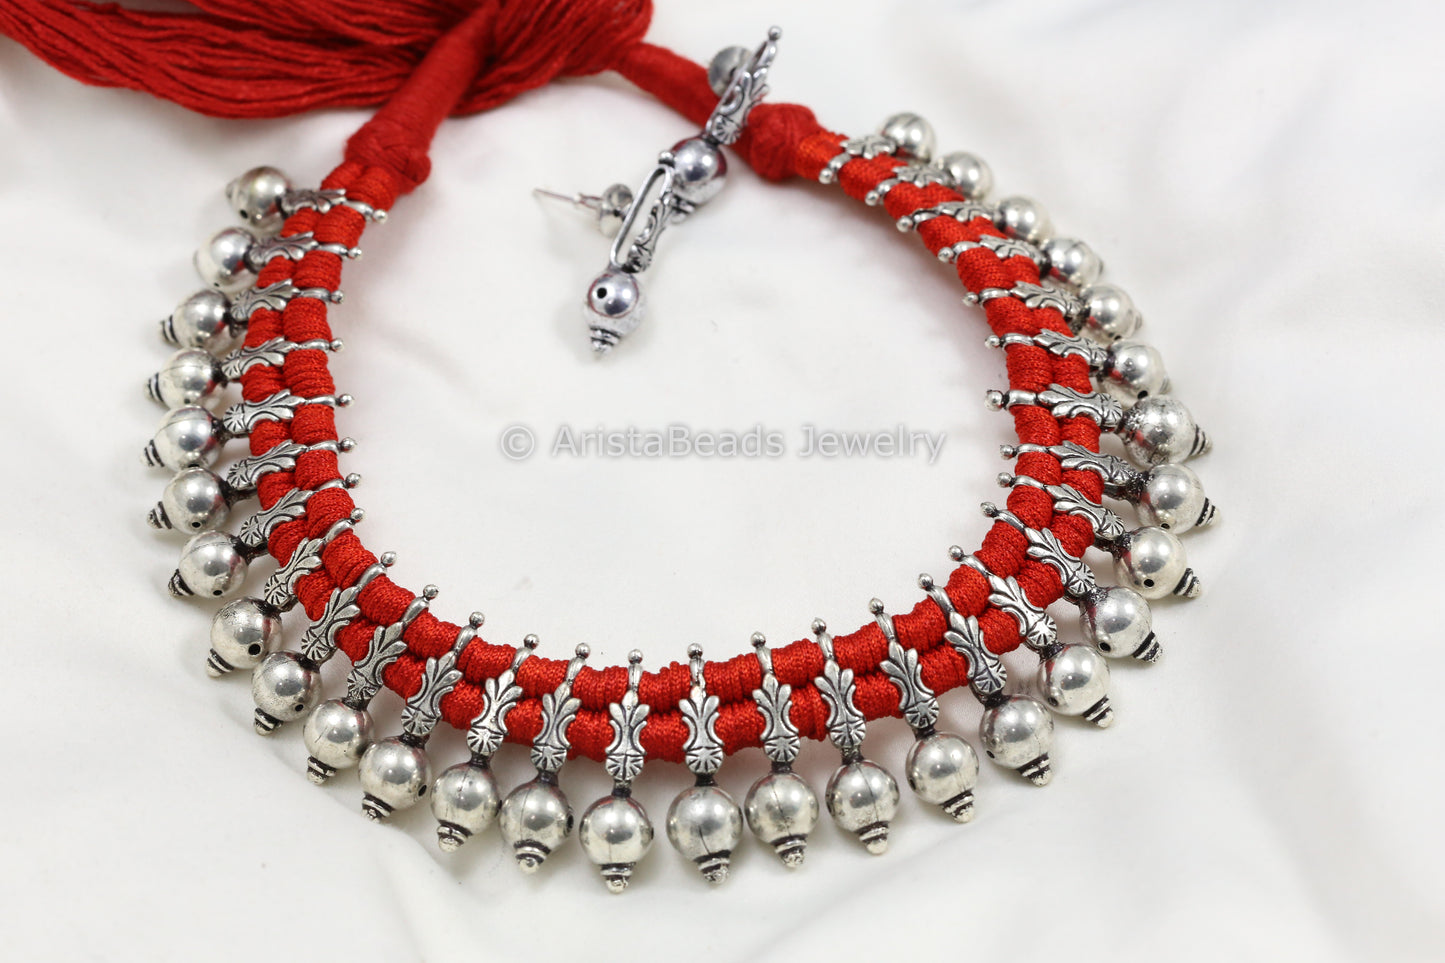 Silver Look Alike Thread Necklace - Red